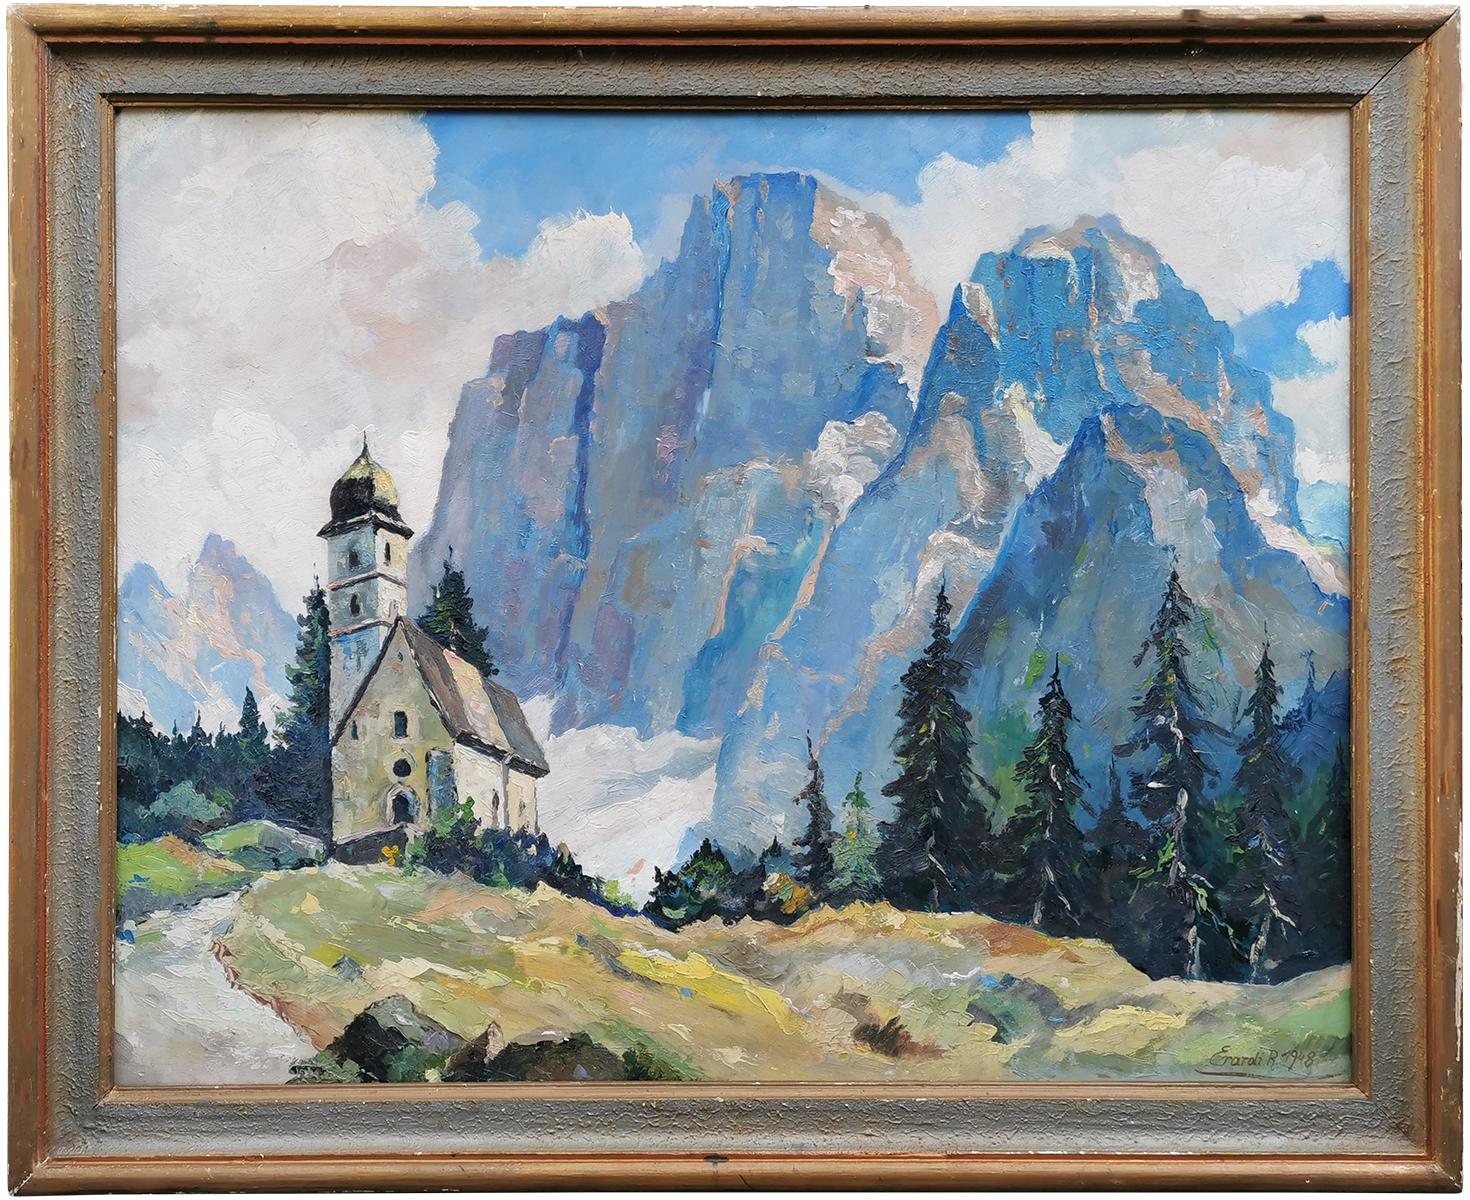 The Monte Pelmo, one of the most famous mountains in the heart of the Dolomites (heritage of the Unesco), and the church of Santa Fosca, in Selva di Cadore.
Erardi paints 